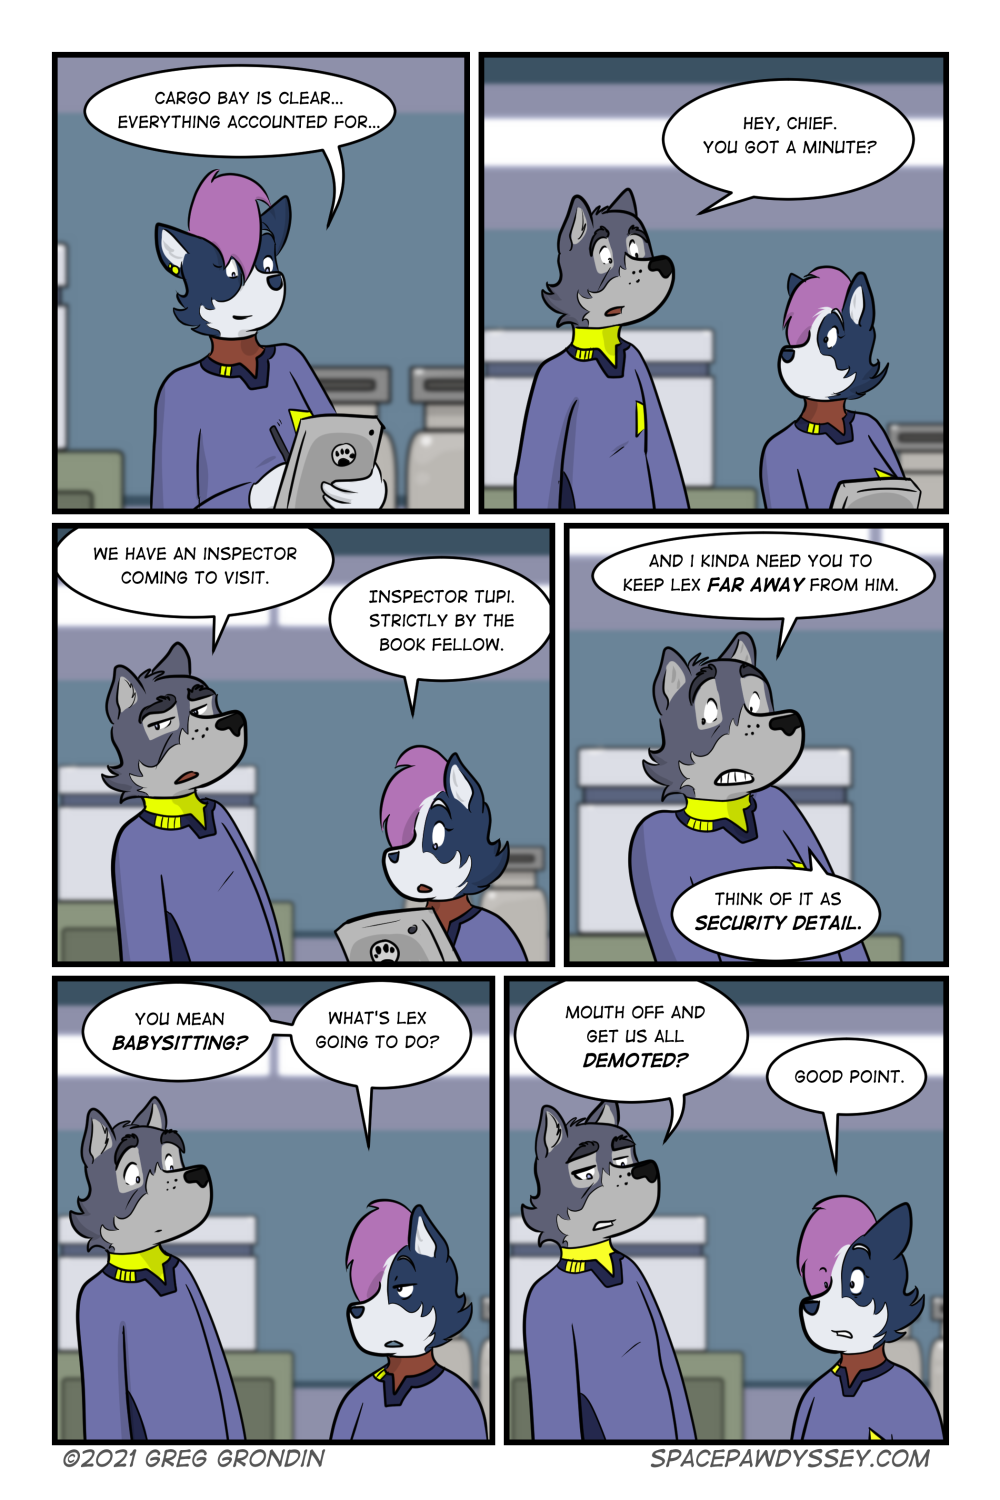 Space Pawdyssey #517